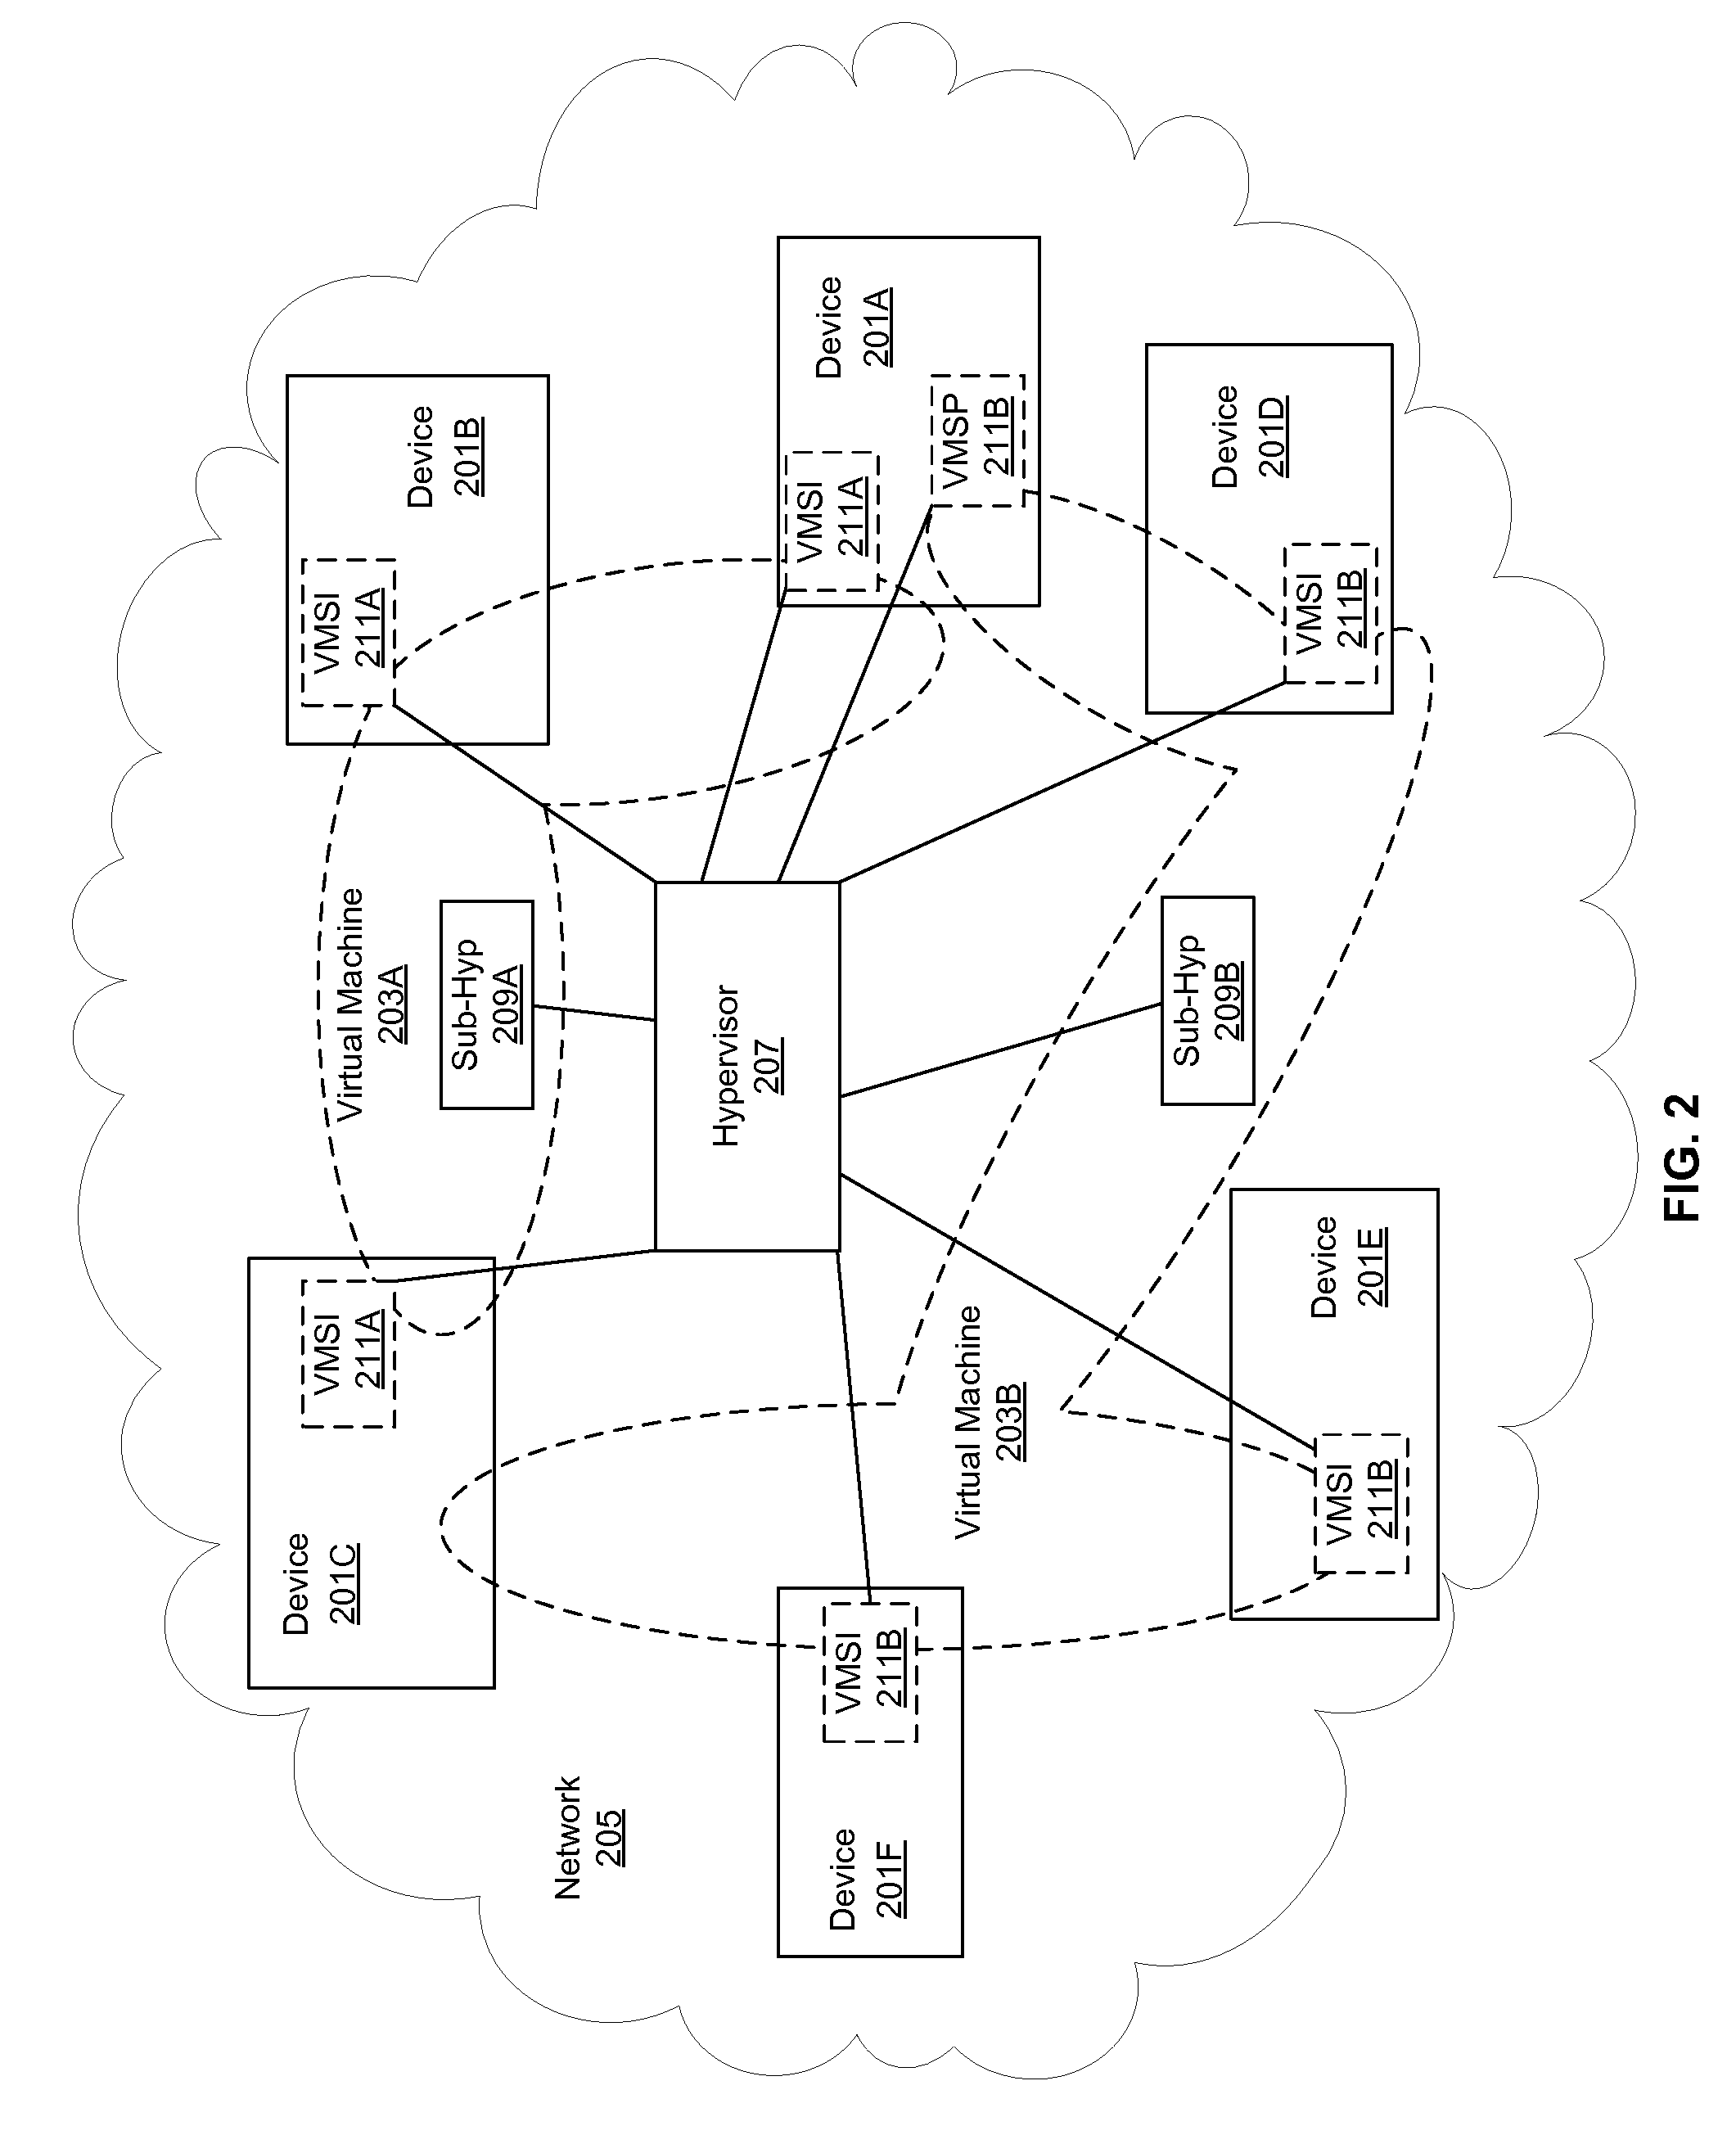 Method and system for fault tolerance and resilience for virtualized machines in a network